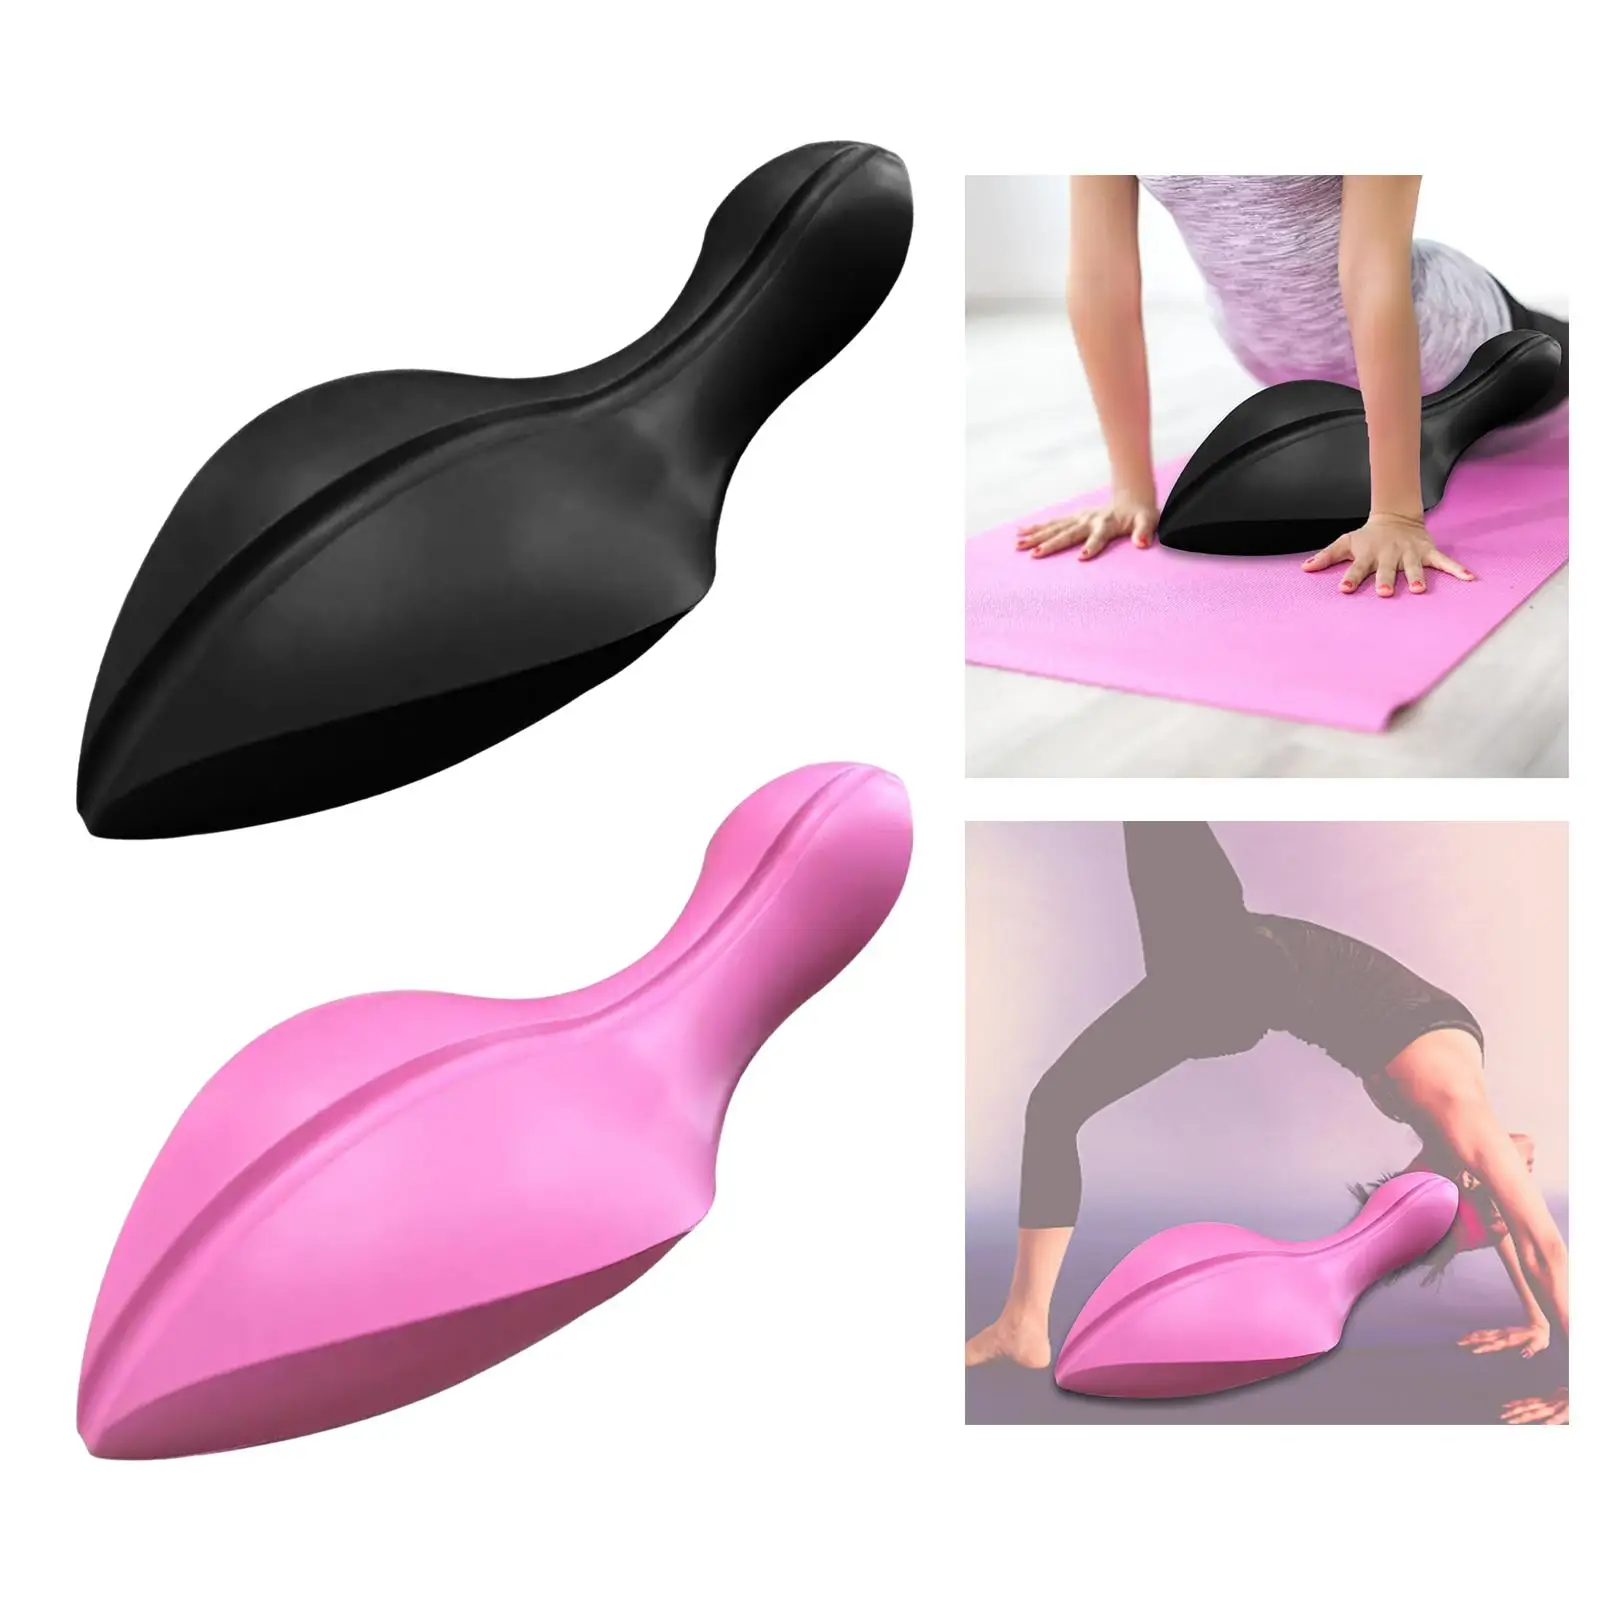 

Spine Correction Spinal Orthosis Massage Bed Training Accessories Fitness Equipment for Balance Core Trainer Pilates Home Gym